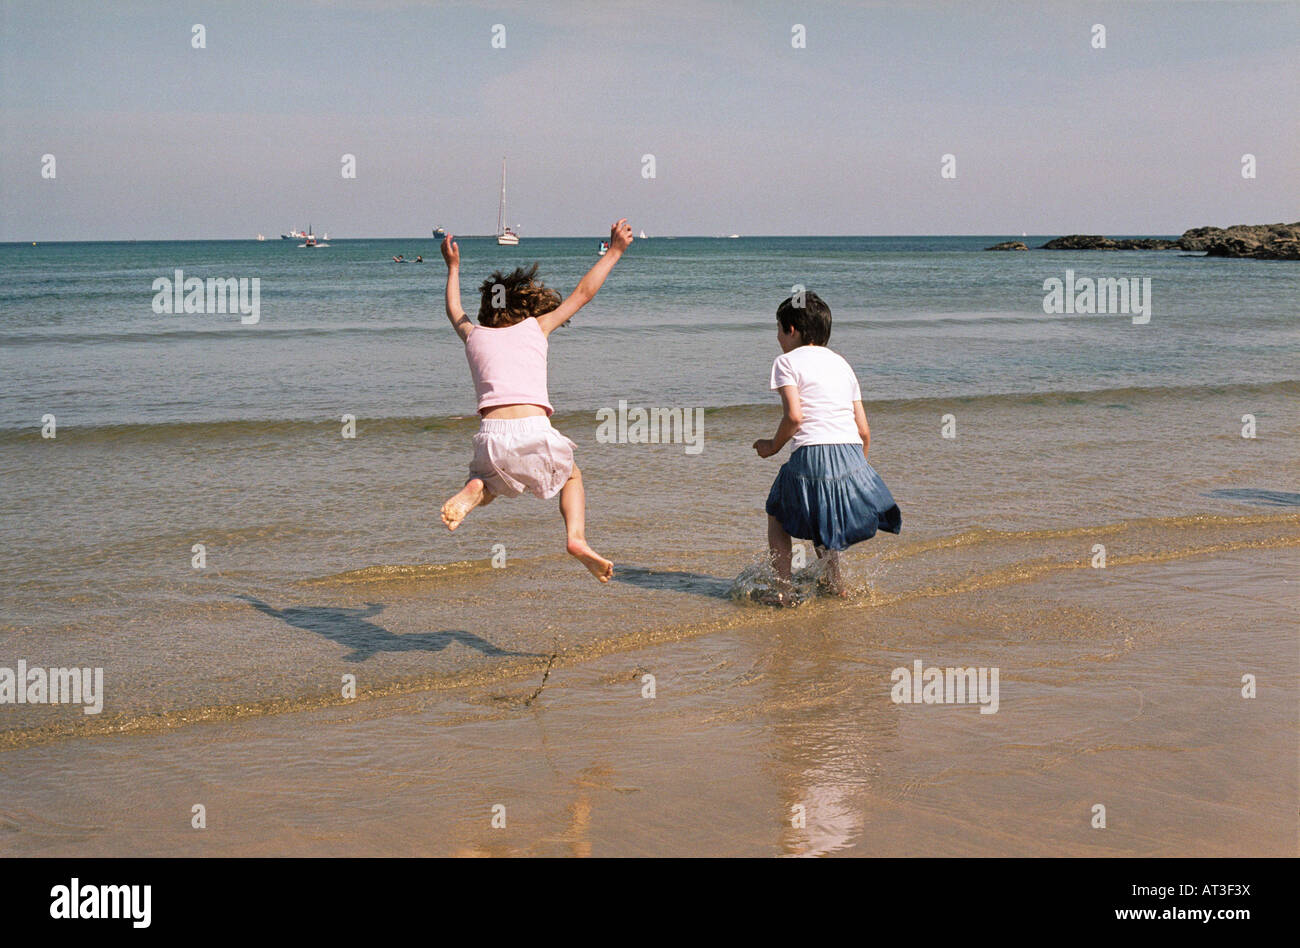 Two young girls jumping in the sea Stock Photo